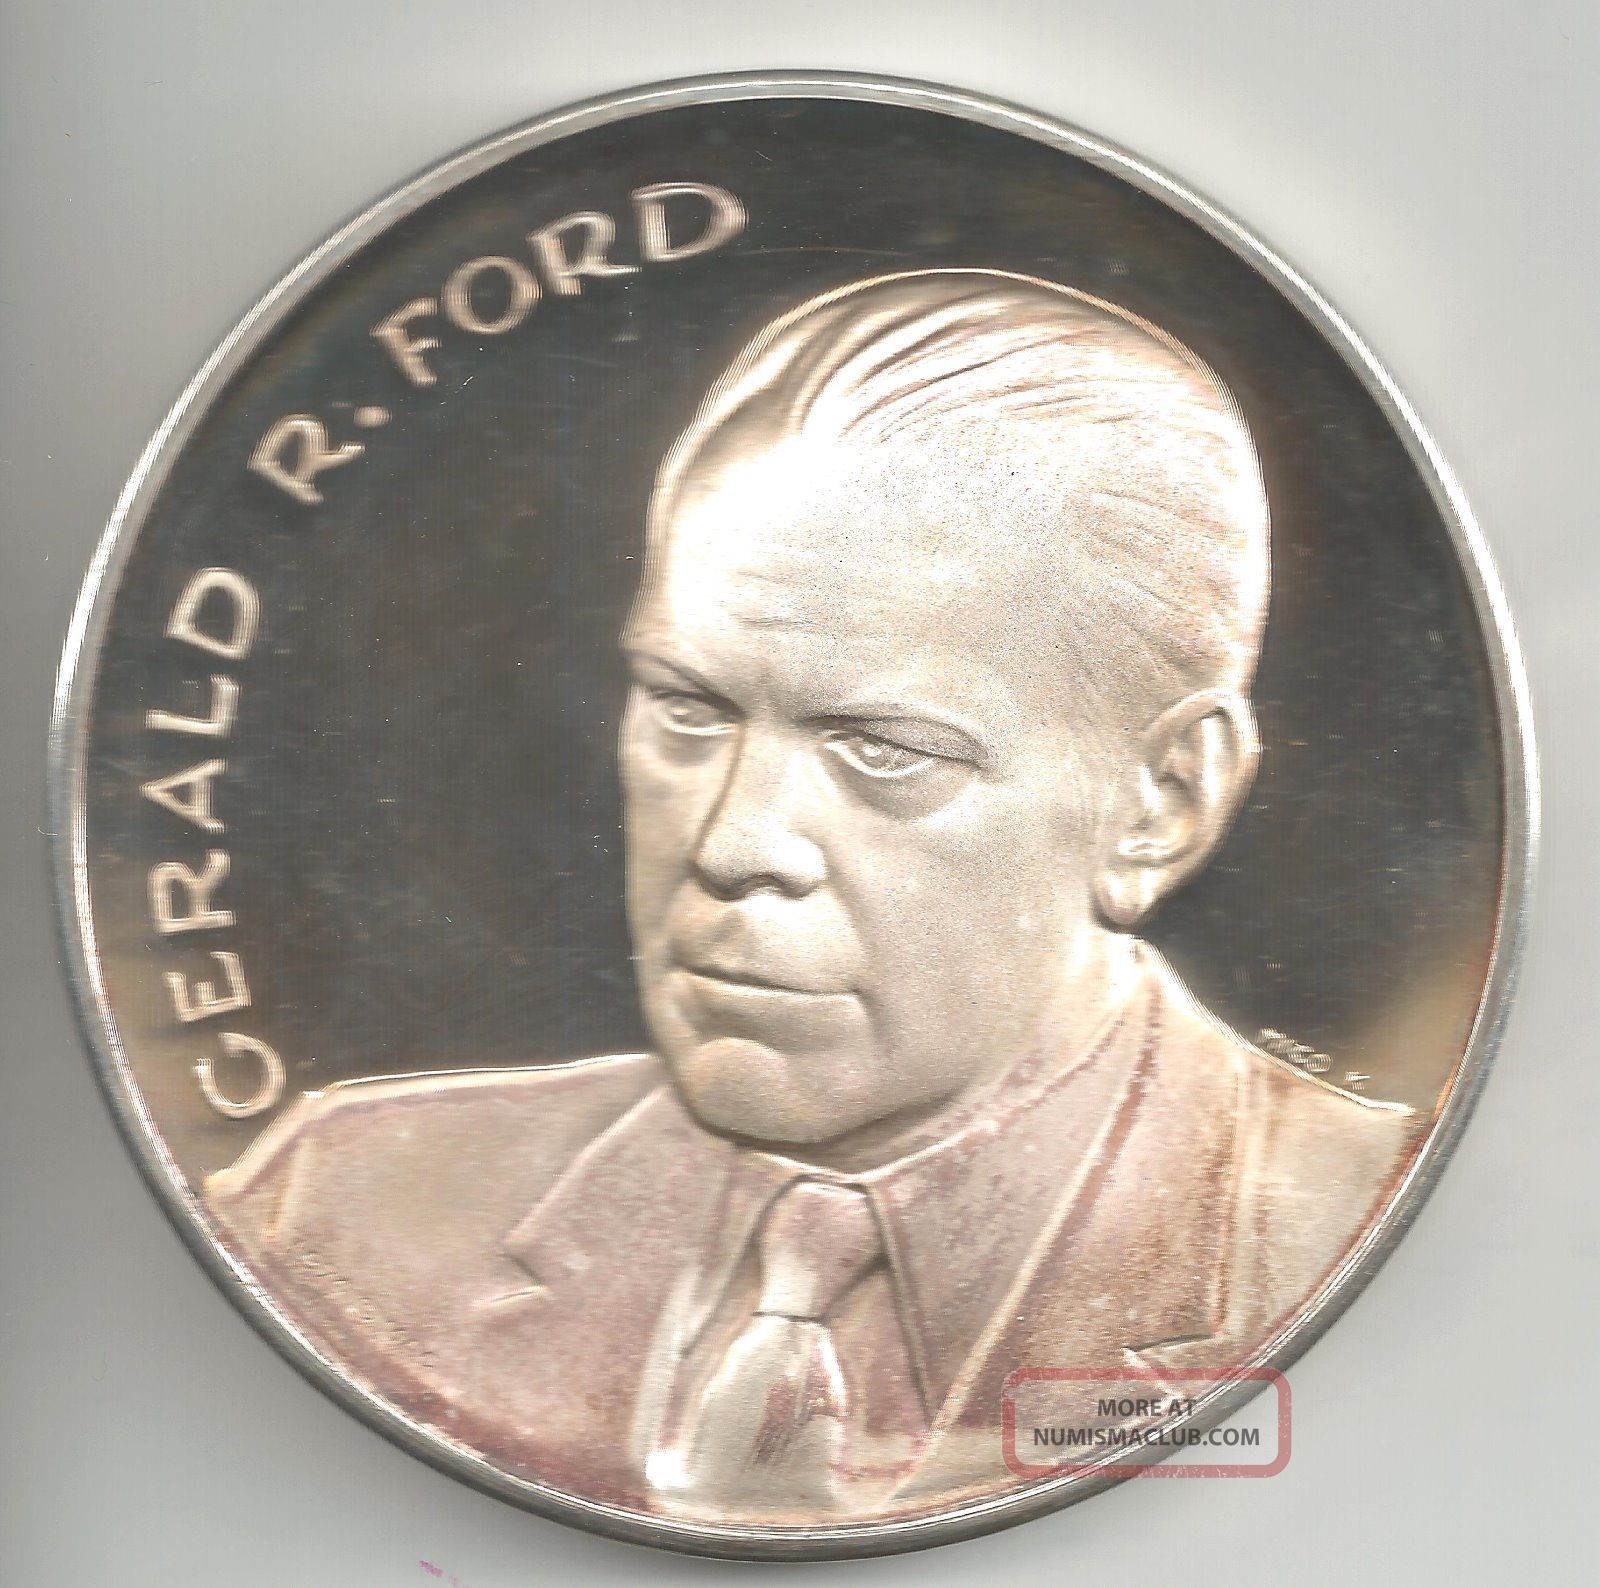 Gerald ford medal pictures #4